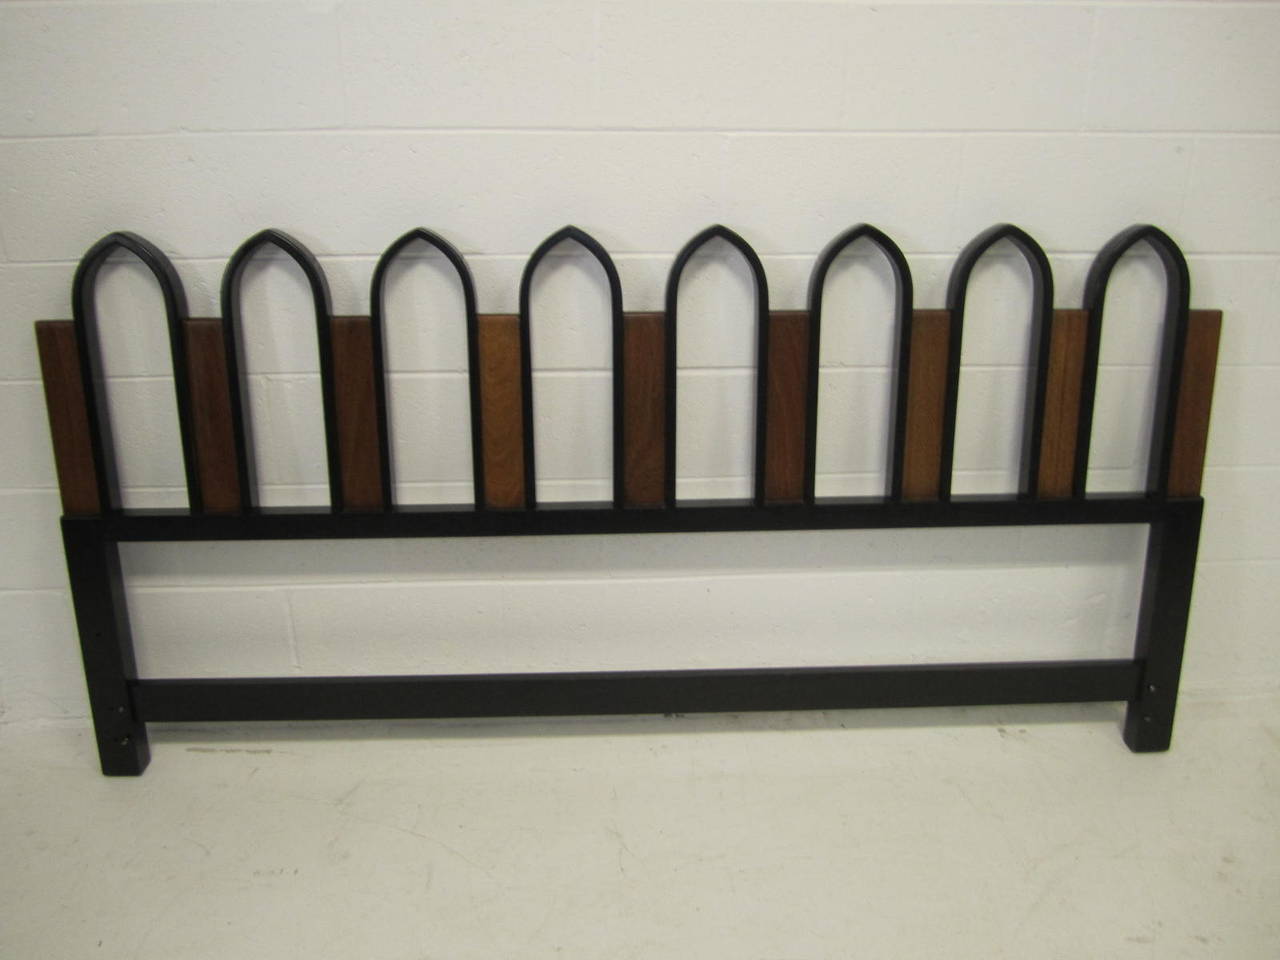 King-size headboard with ebonized walnut arches separated by natural walnut panels. Harvey Probber, circa 1950. Identically finish on reverse side so may free-stand if desired.